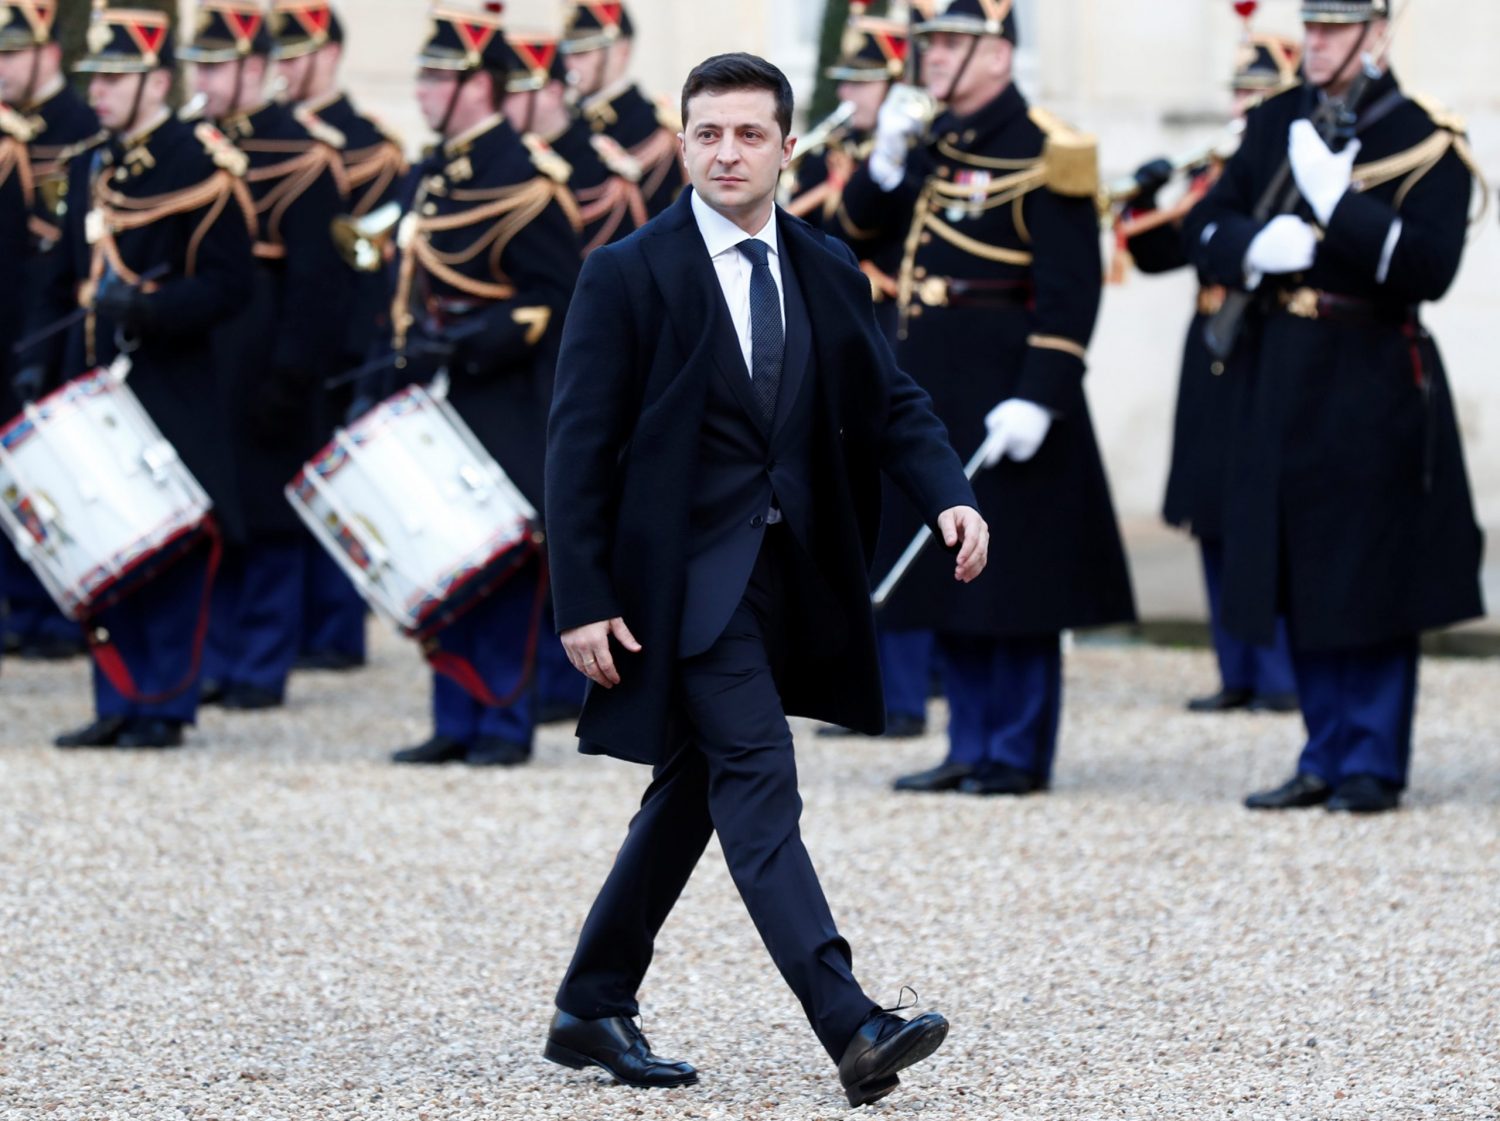 Paris impasse: Time for Zelenskyy to get real about Russia